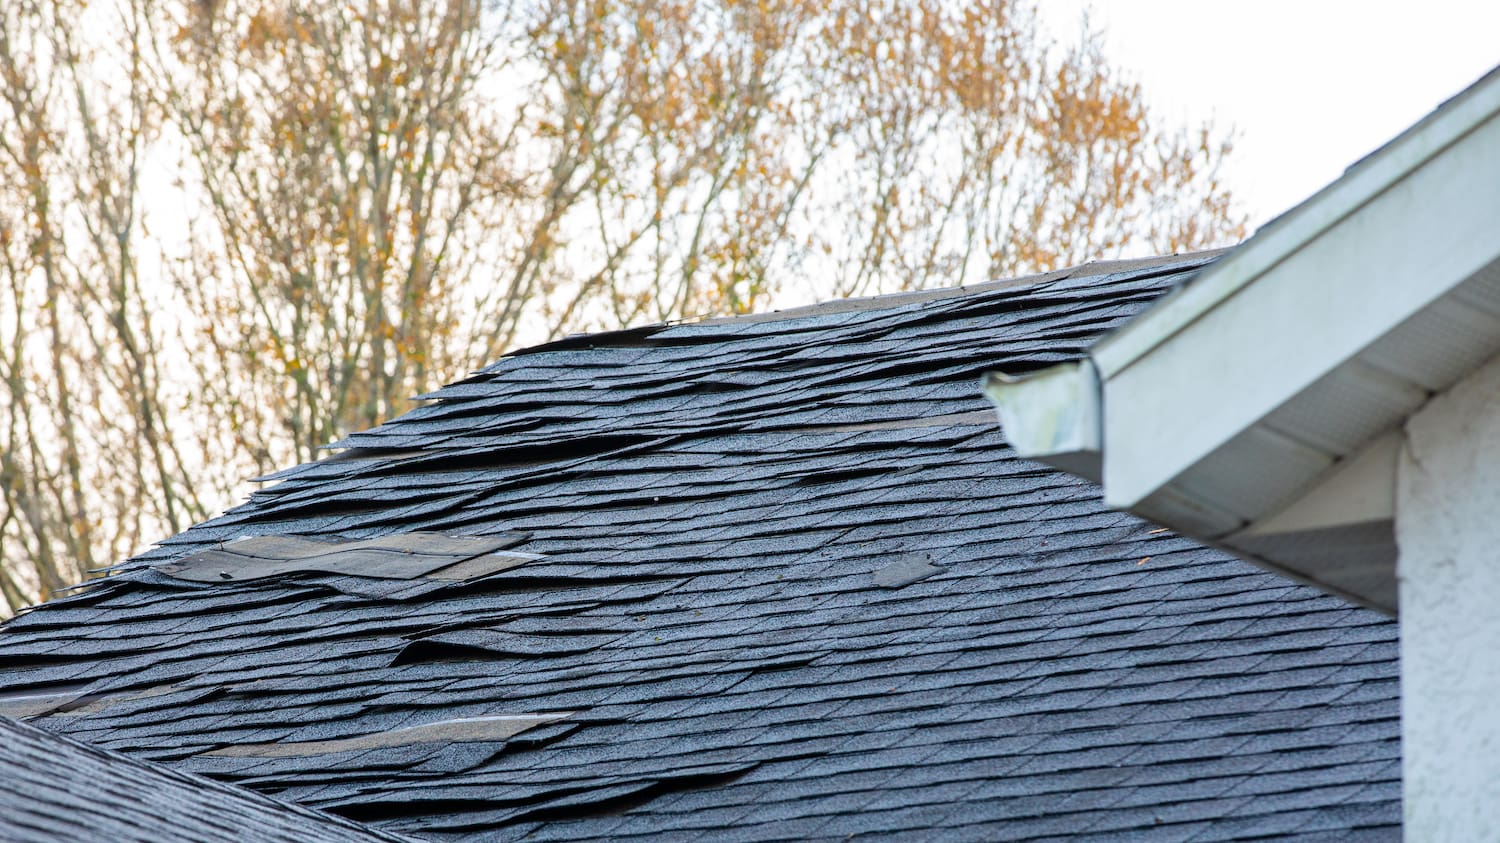 Roof storm damage showing rippling of shingles